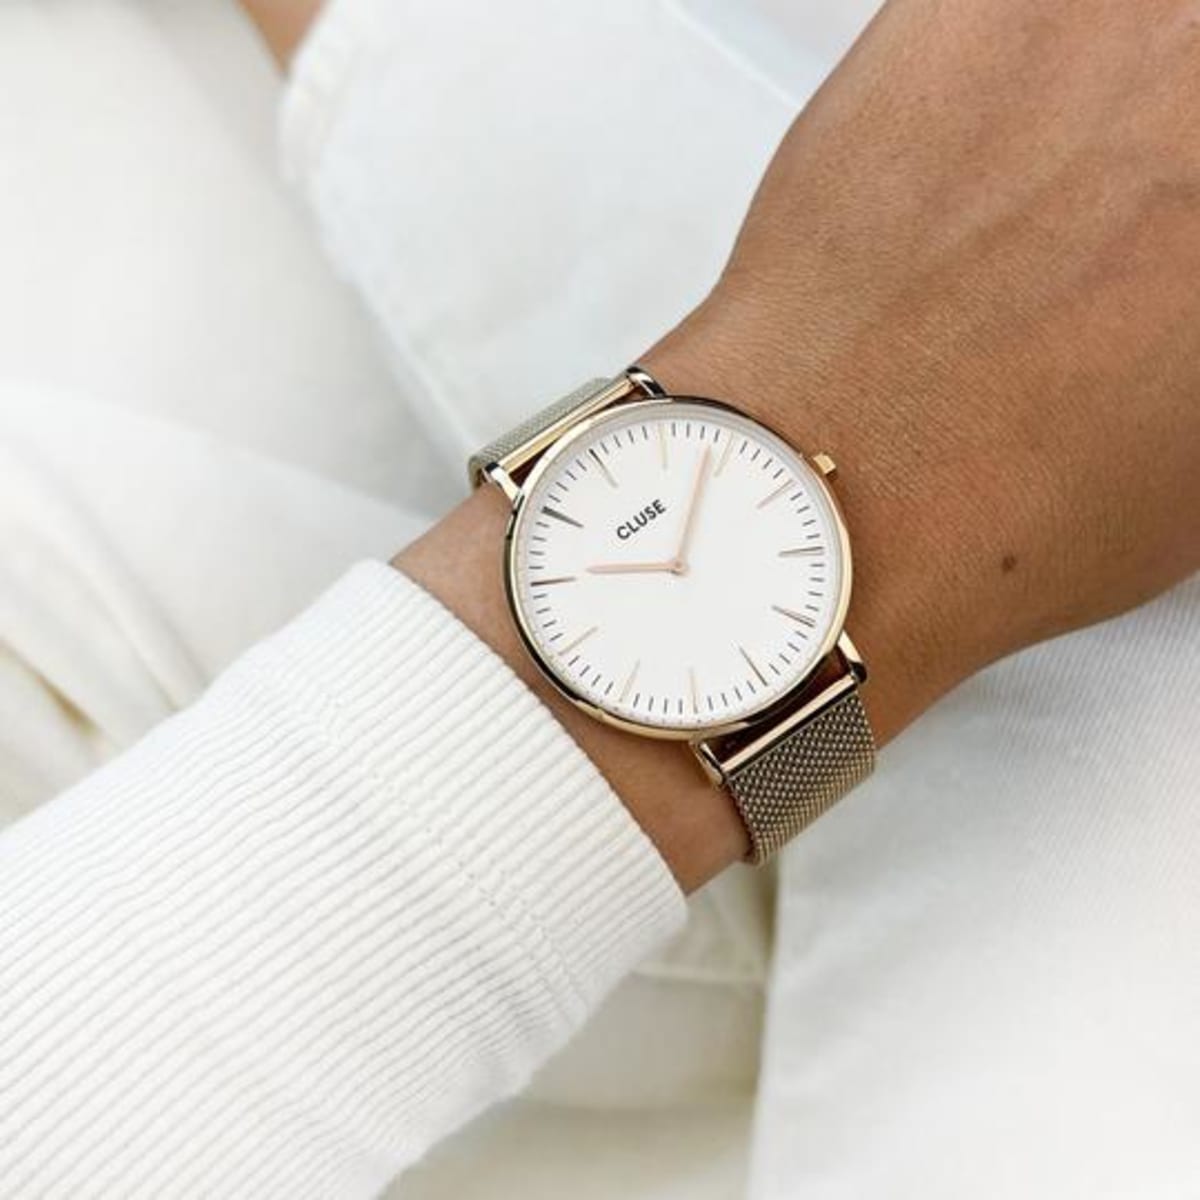 The Classic CLUSE watch in the Boho Chic style. With a 38mm diameter case and an 18mm strap, this is the largest size in the CLUSE range. This product sells out fast - get it while it's still in stock! Rose gold is a beautiful colour on Irish skin- it picks up the natural warm tones and they compliment each other beautifully. 